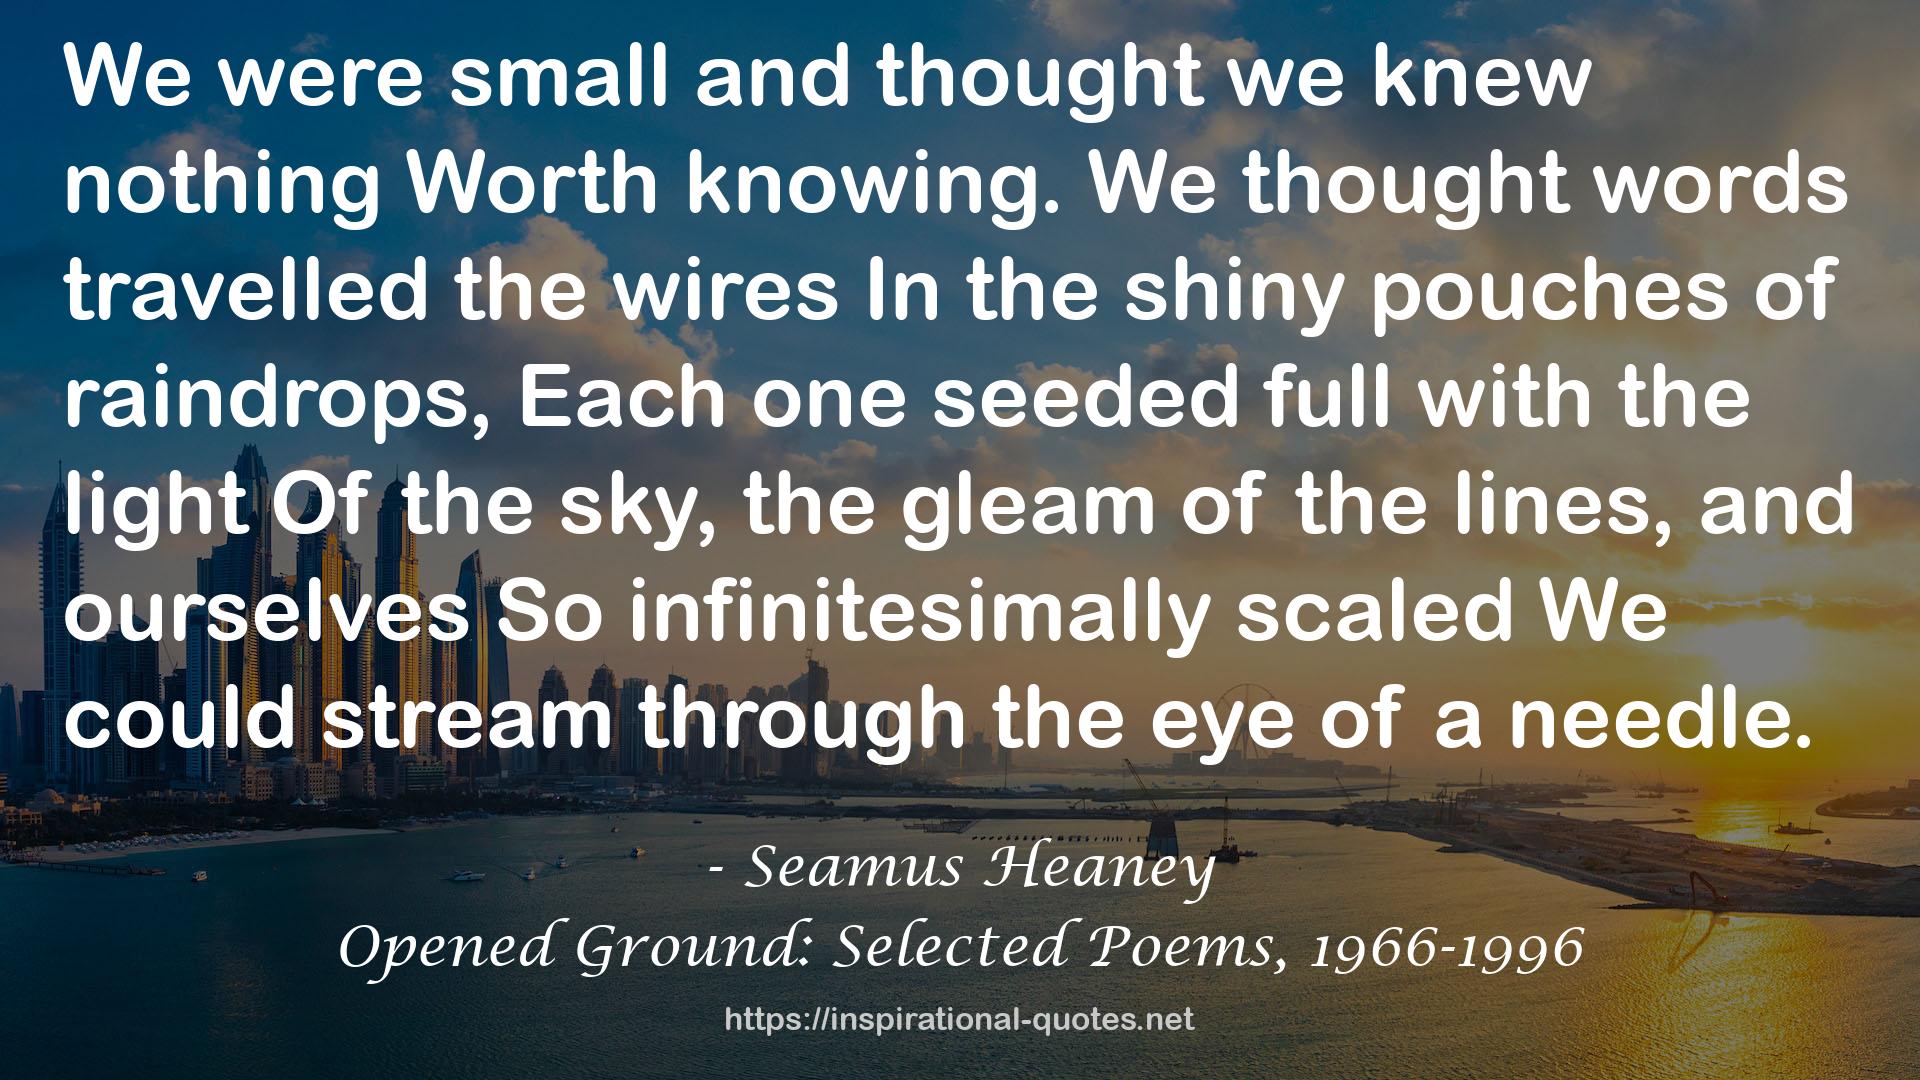 Opened Ground: Selected Poems, 1966-1996 QUOTES